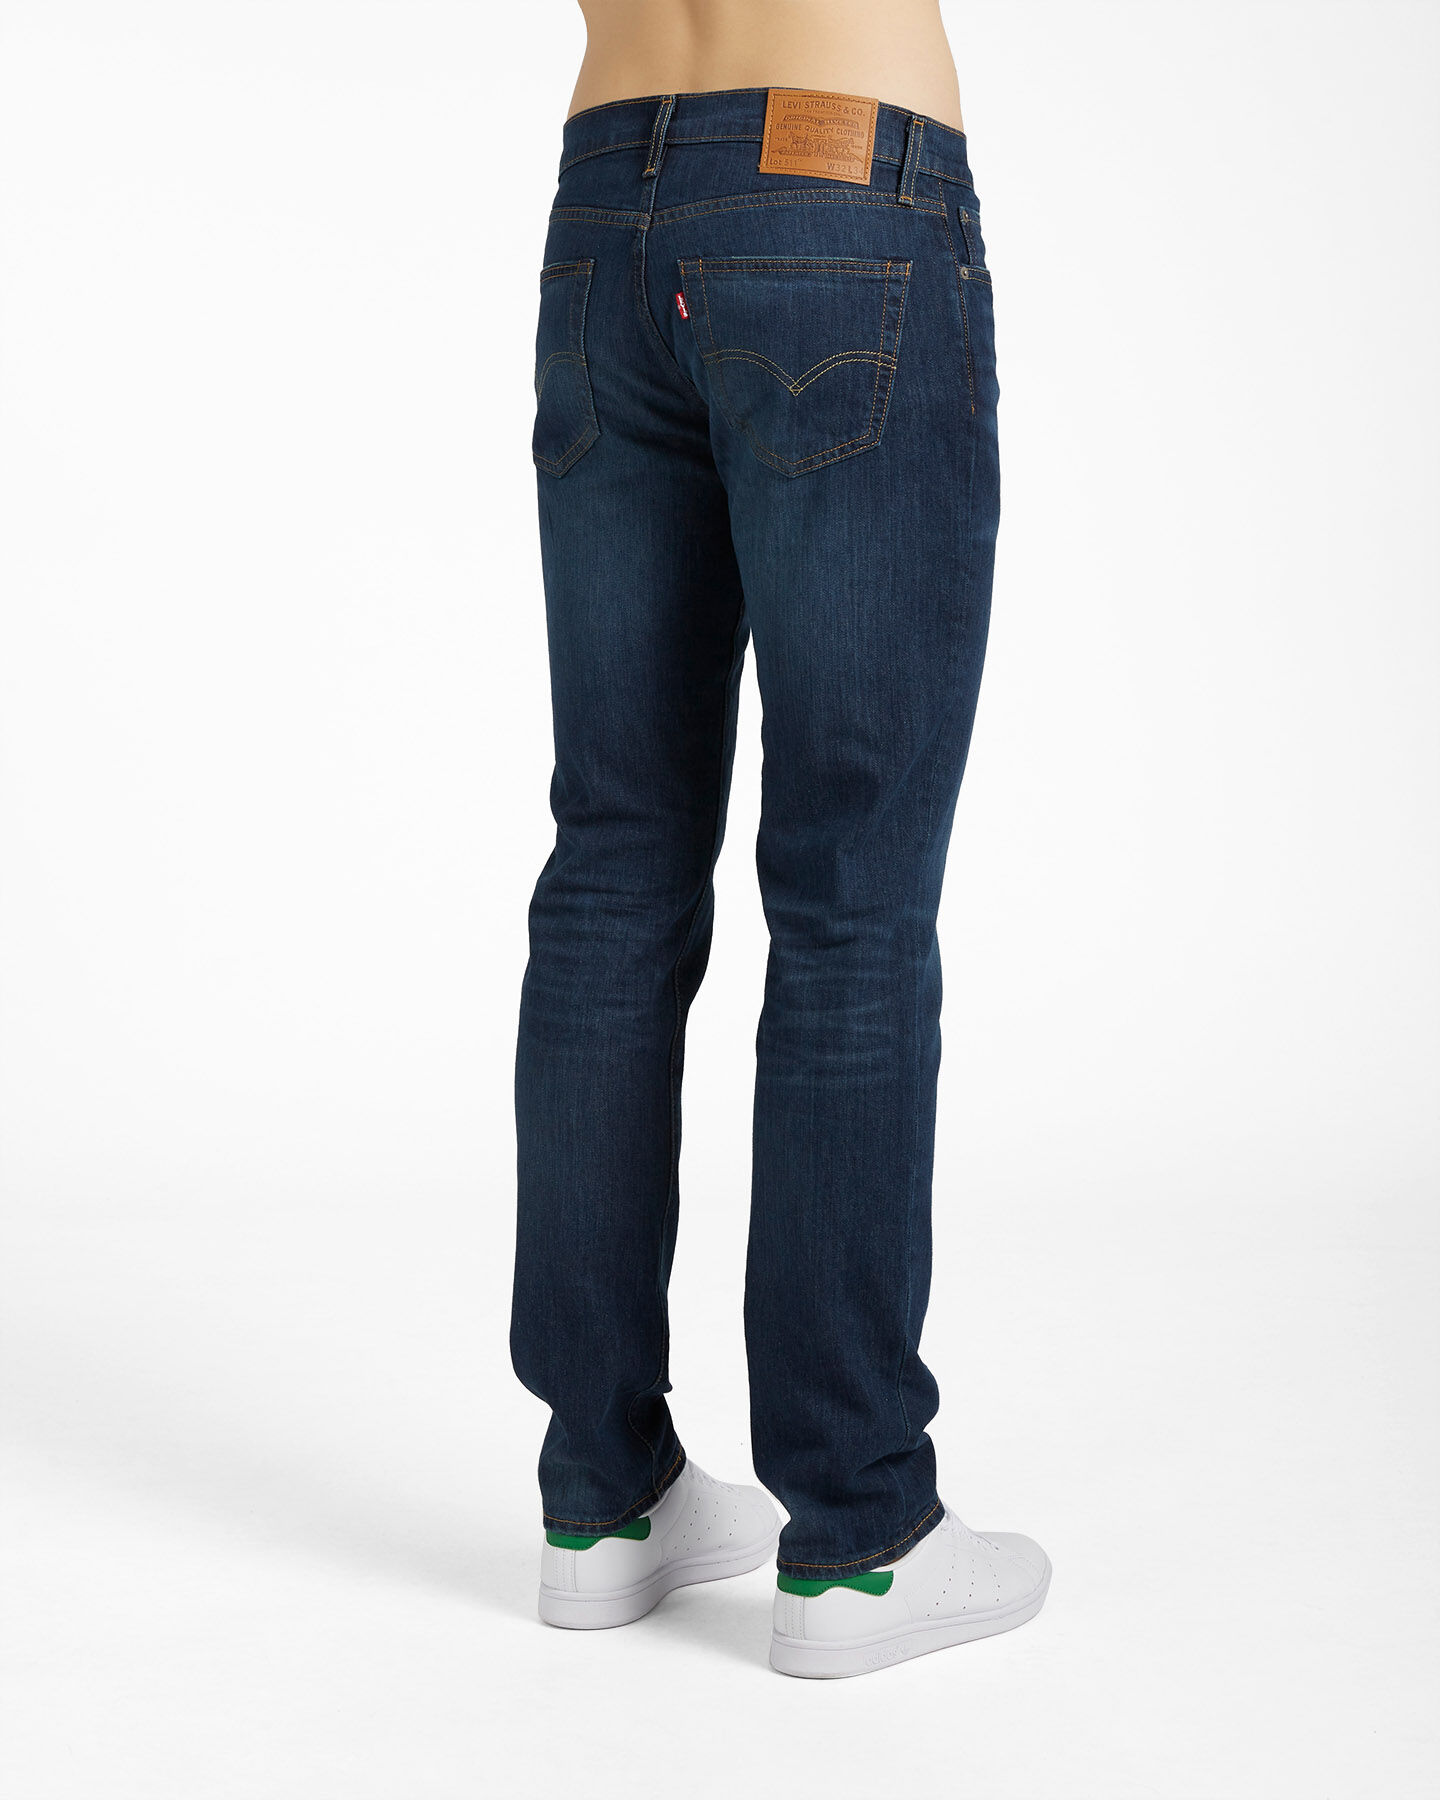  Jeans LEVI'S 511 SLIM FIT  M S4087712|0970|30 scatto 1